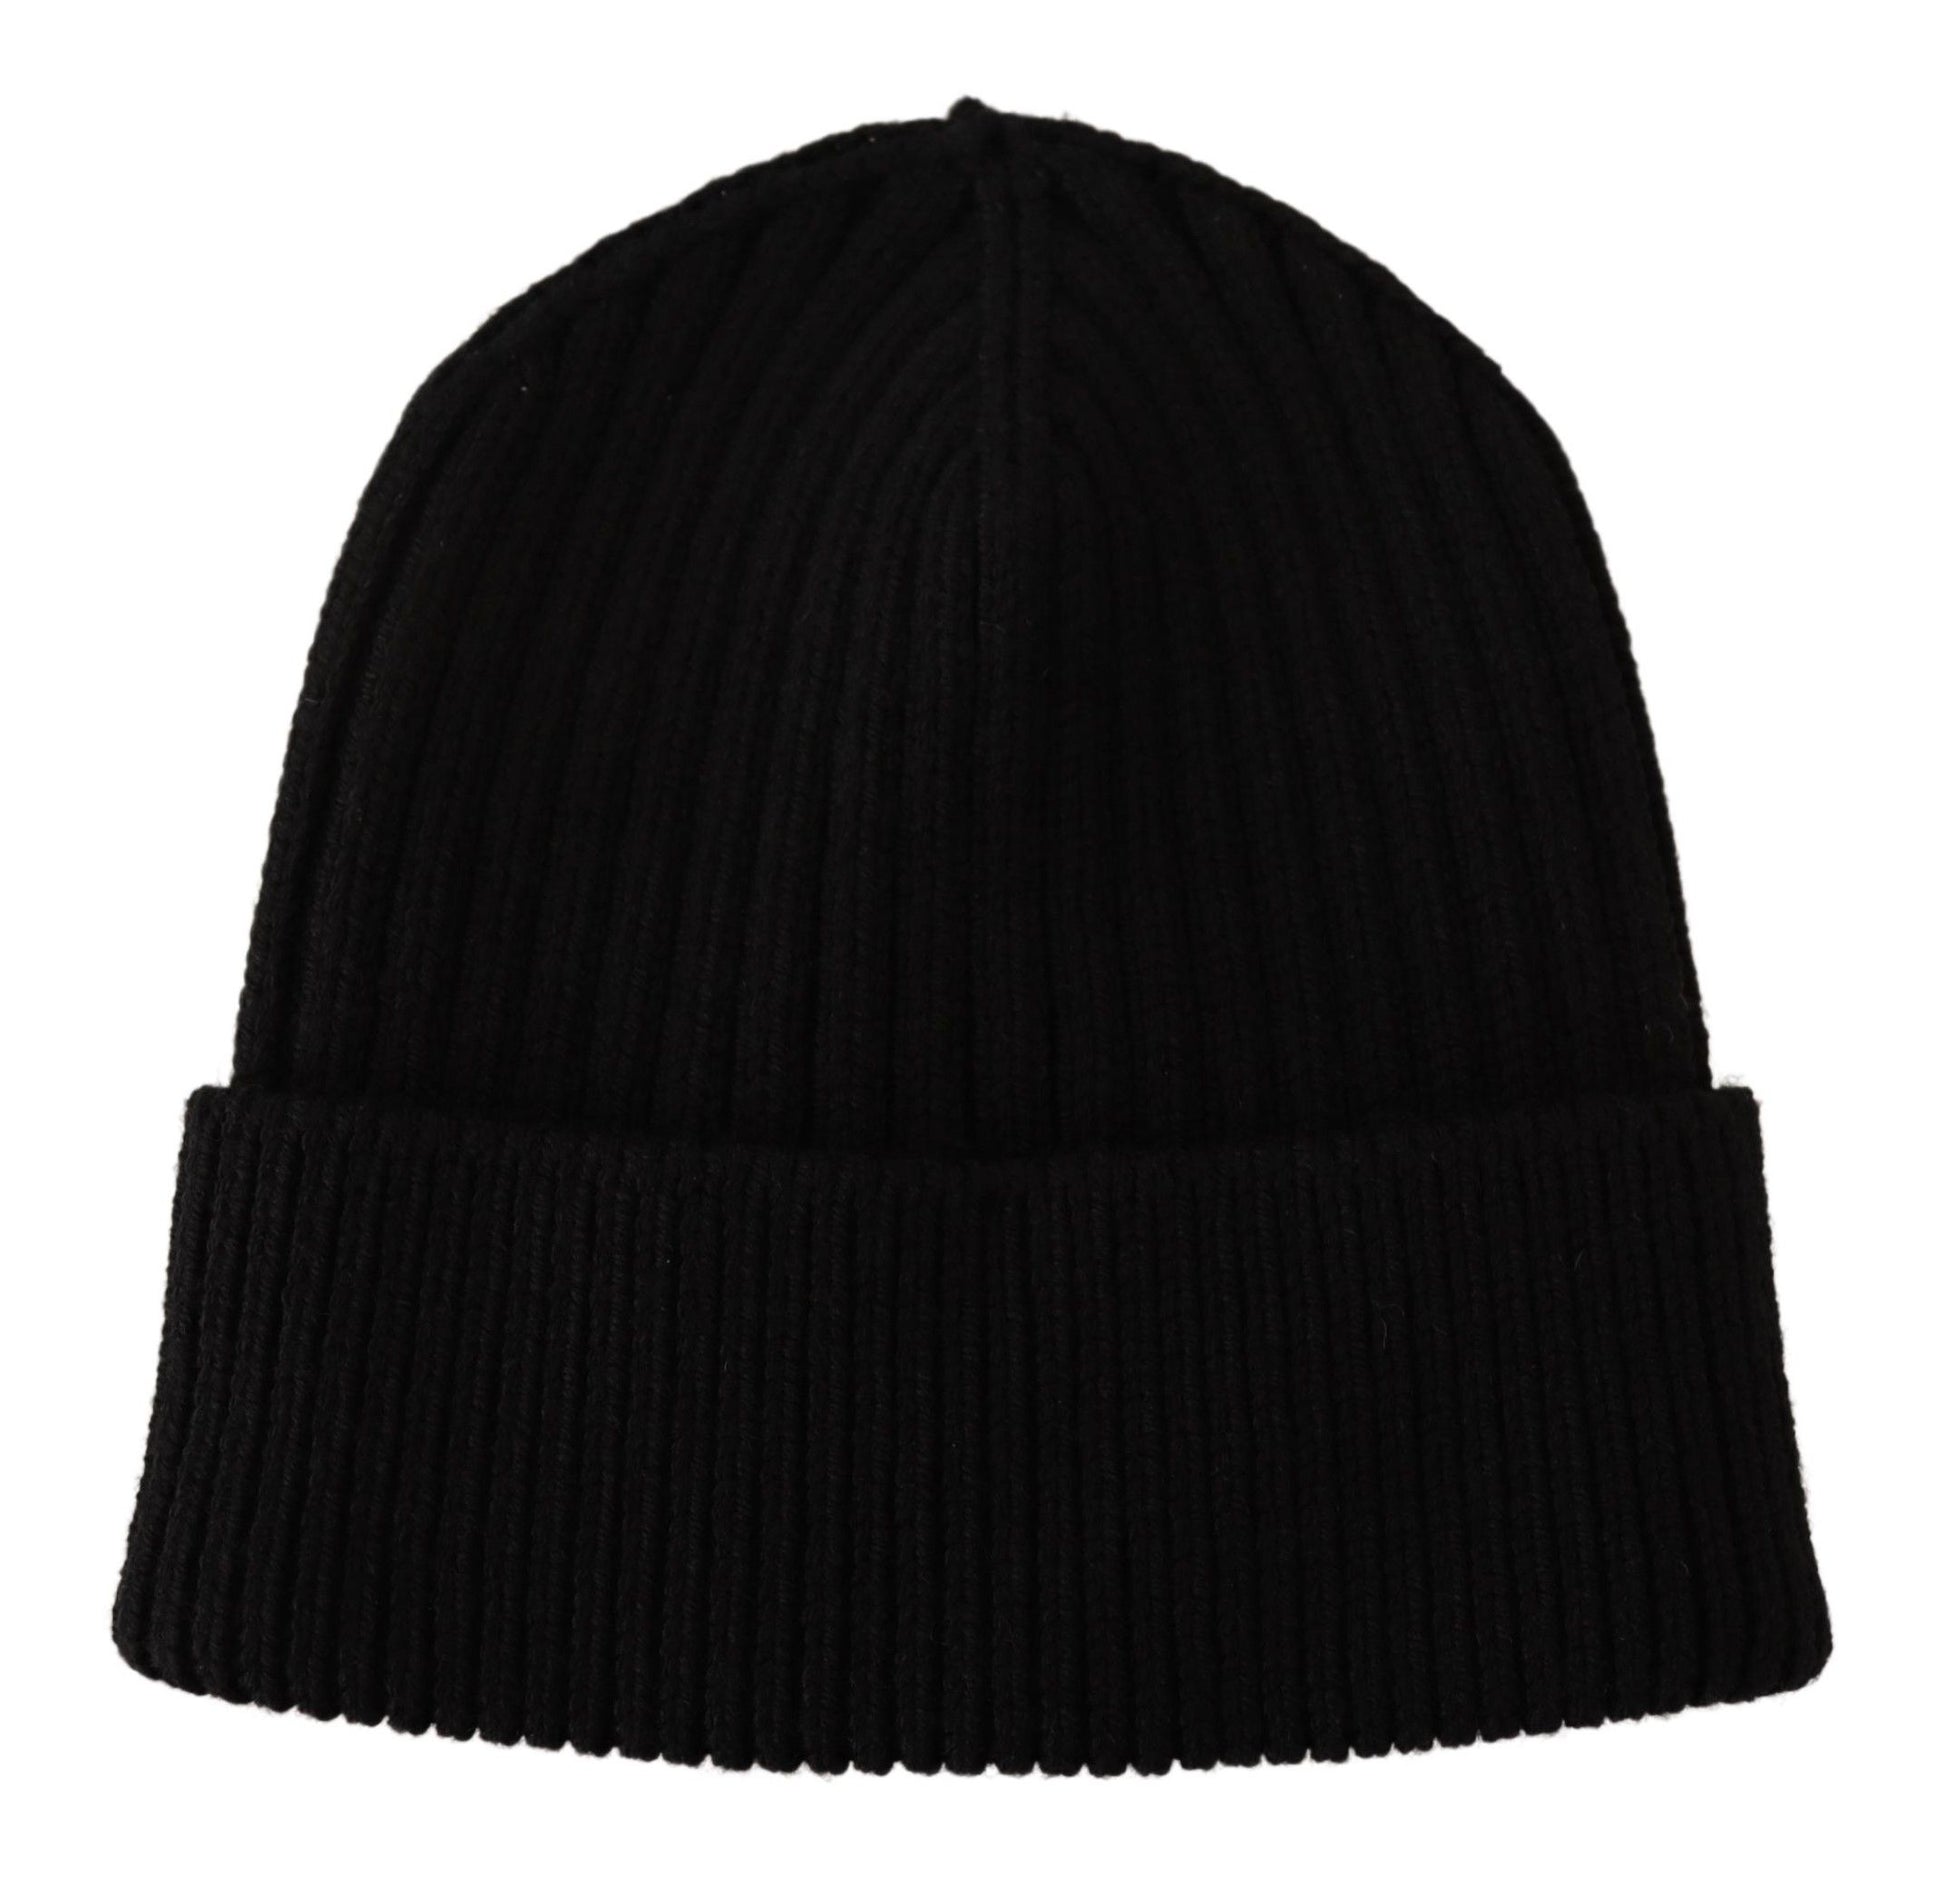 Black Wool Knit Women Winter Hat - Designed by Dolce & Gabbana Available to Buy at a Discounted Price on Moon Behind The Hill Online Designer Discount Store